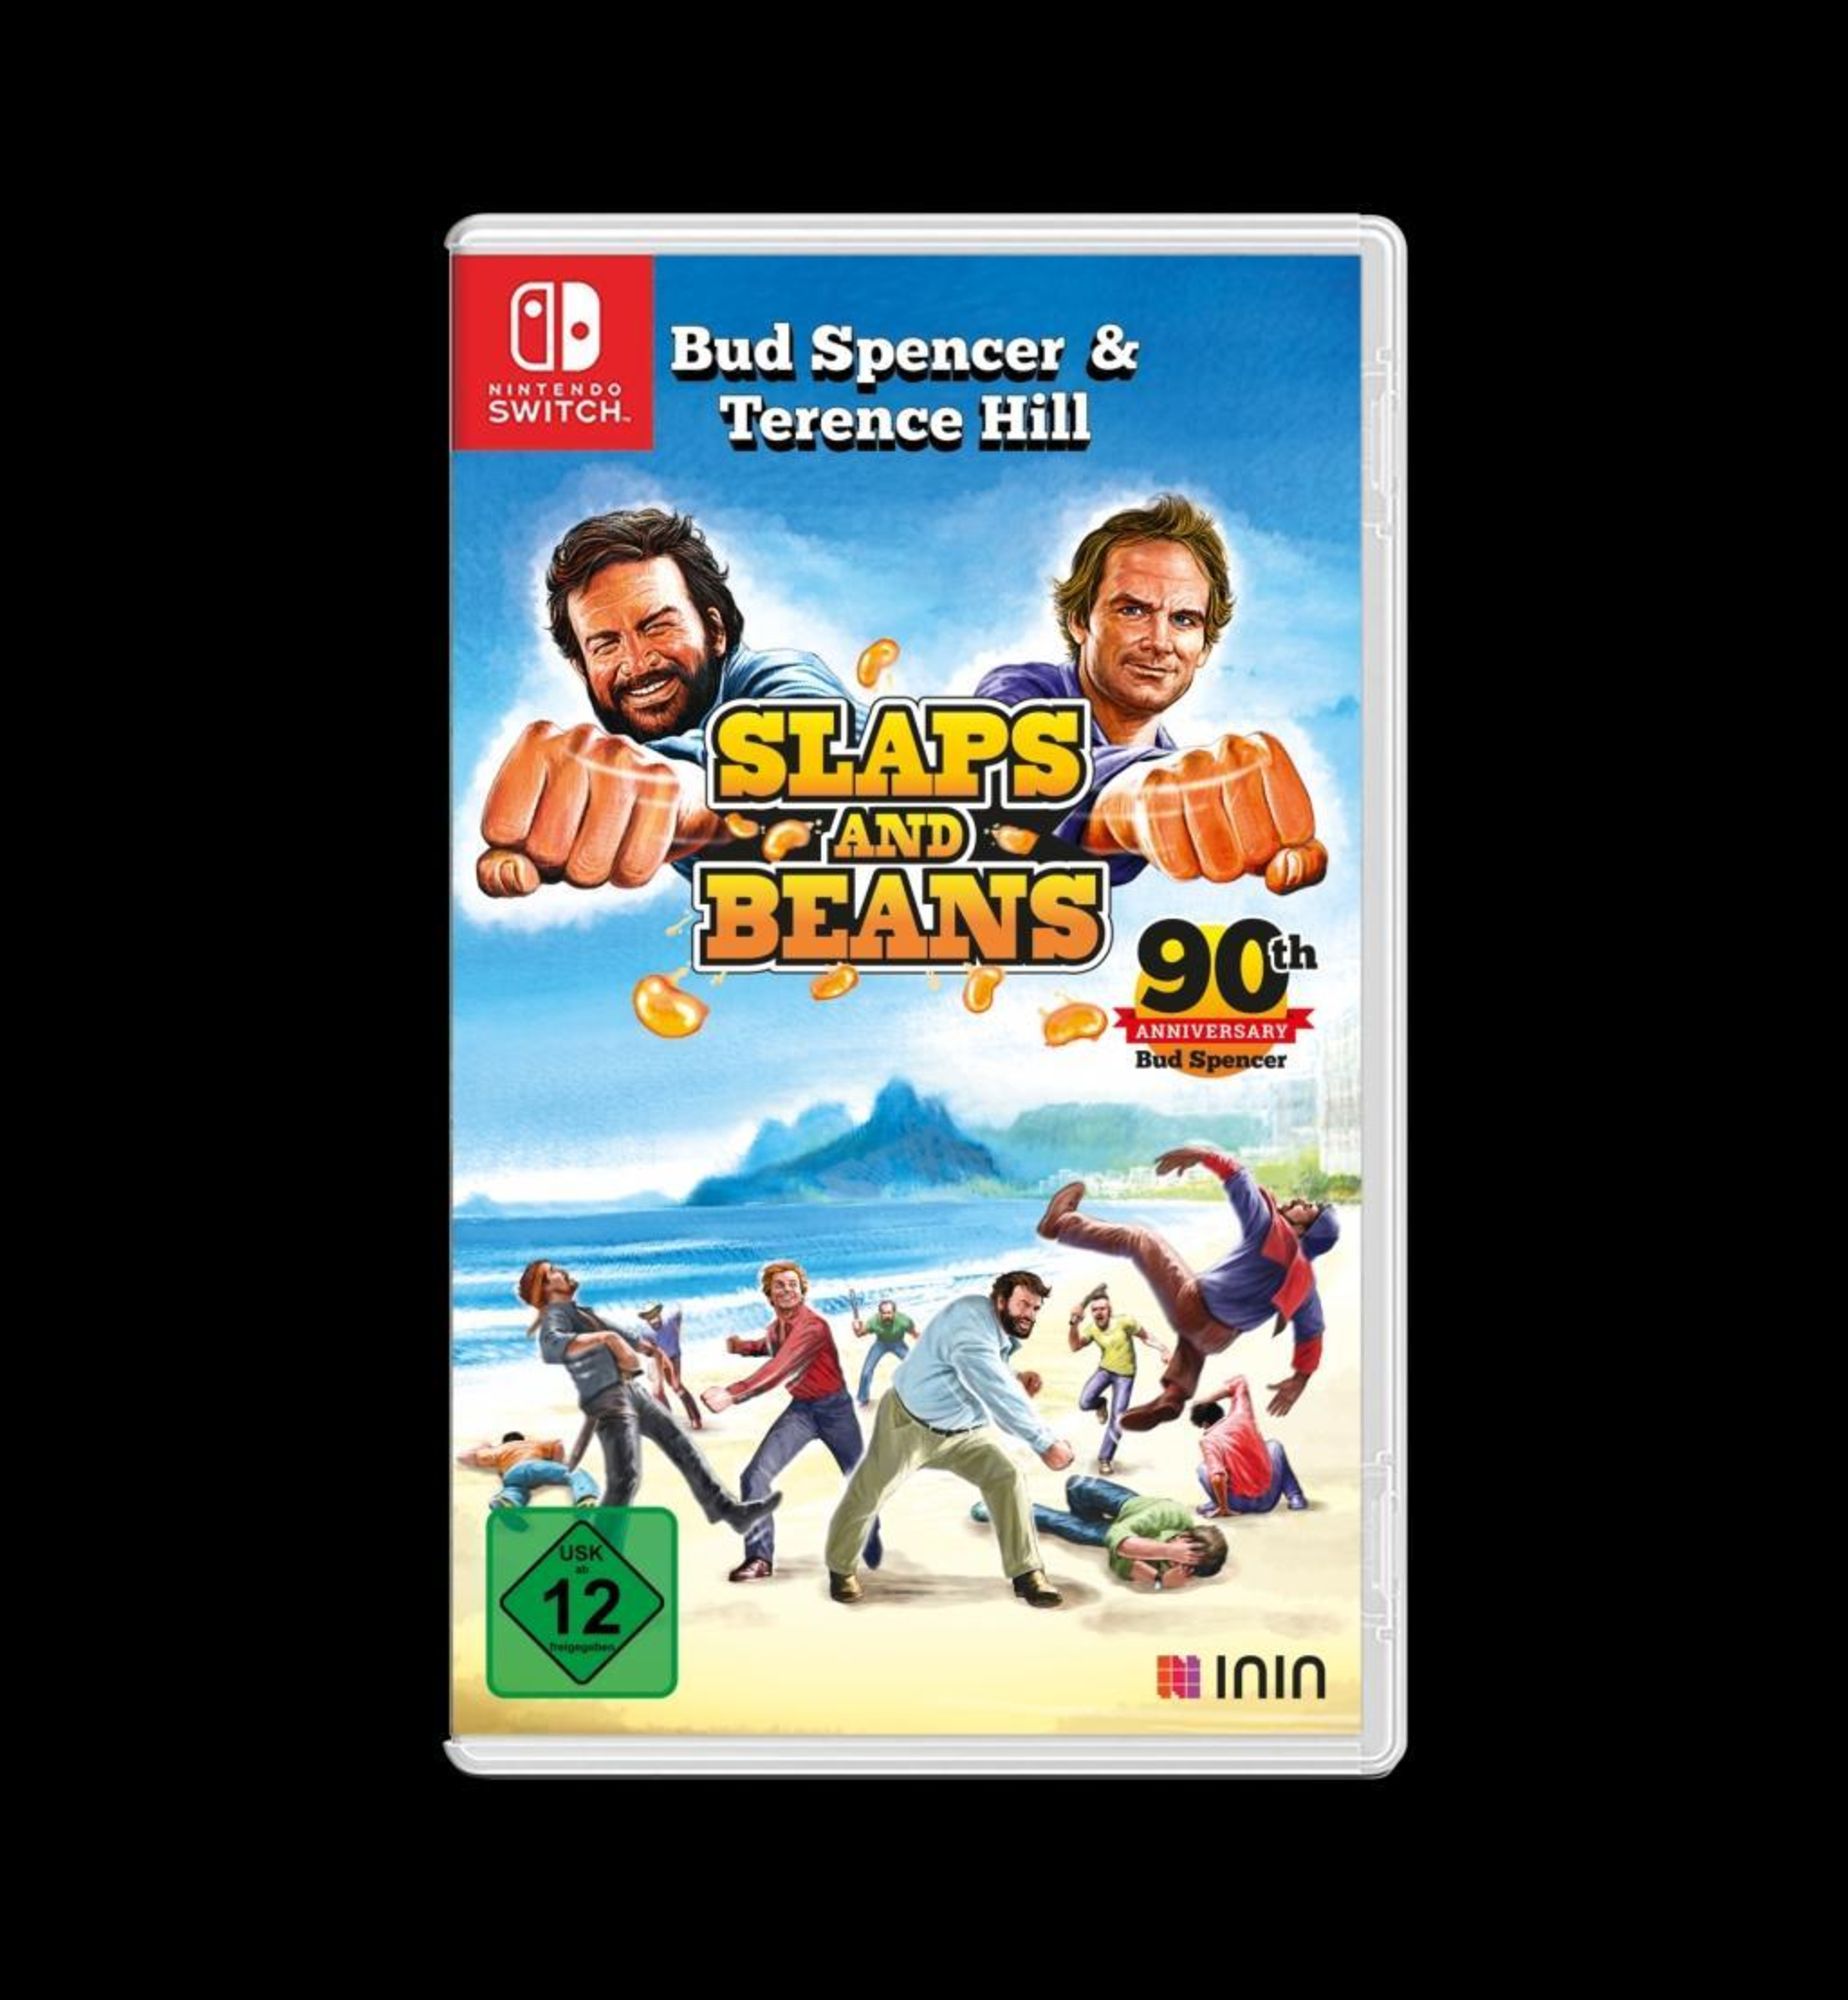 Bud Spencer & Terence Hill - Slaps and Beans\' für \'Nintendo Switch\' kaufen | PS5-Spiele